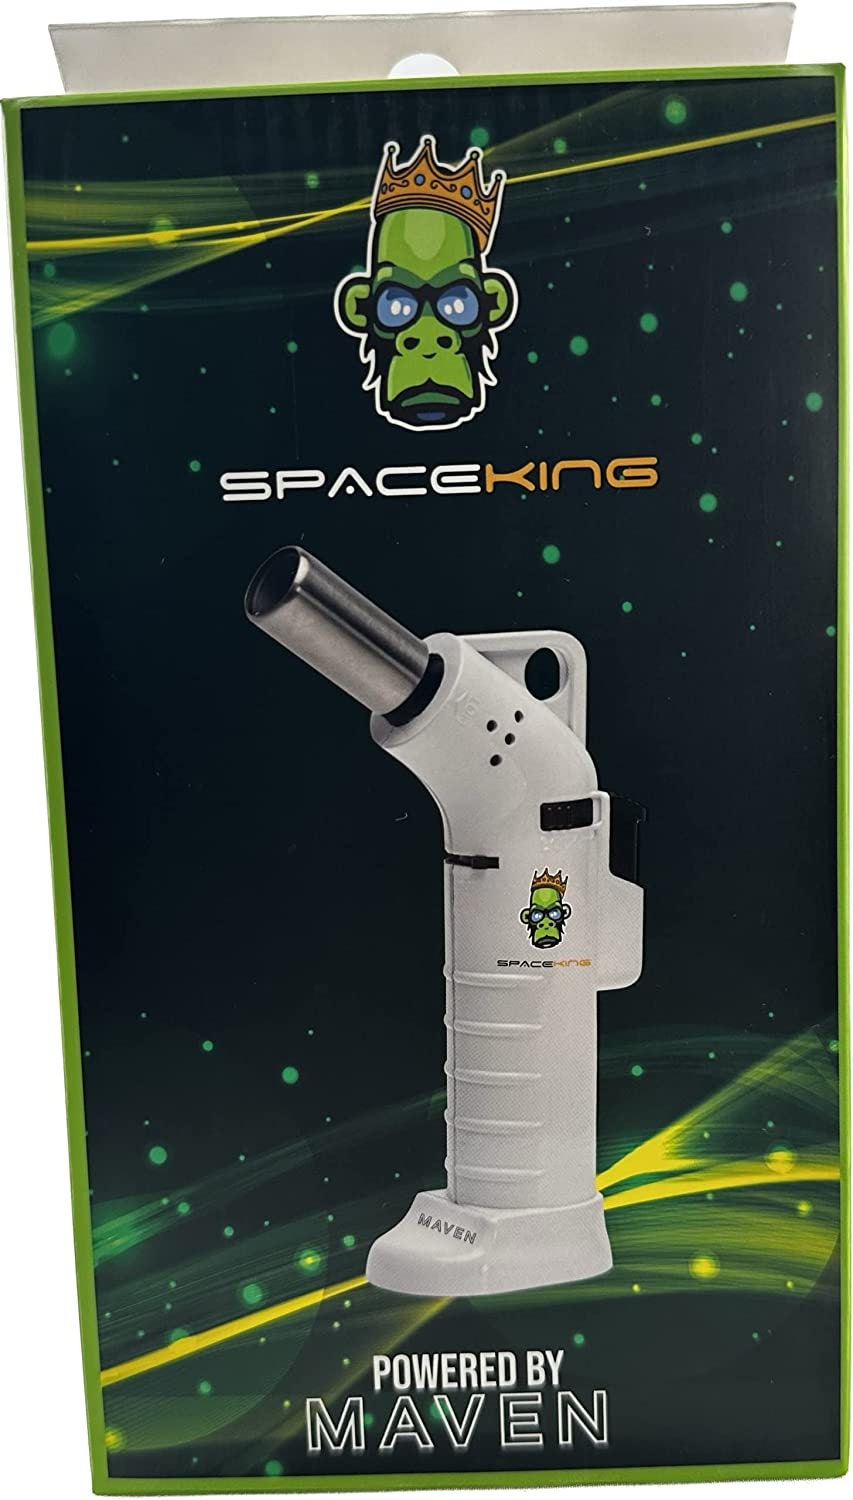 Space King powerful single jet angled flame torch lighter - Smooth Finish - Premium Quality - Adjustable Flame & Lock Function (White)